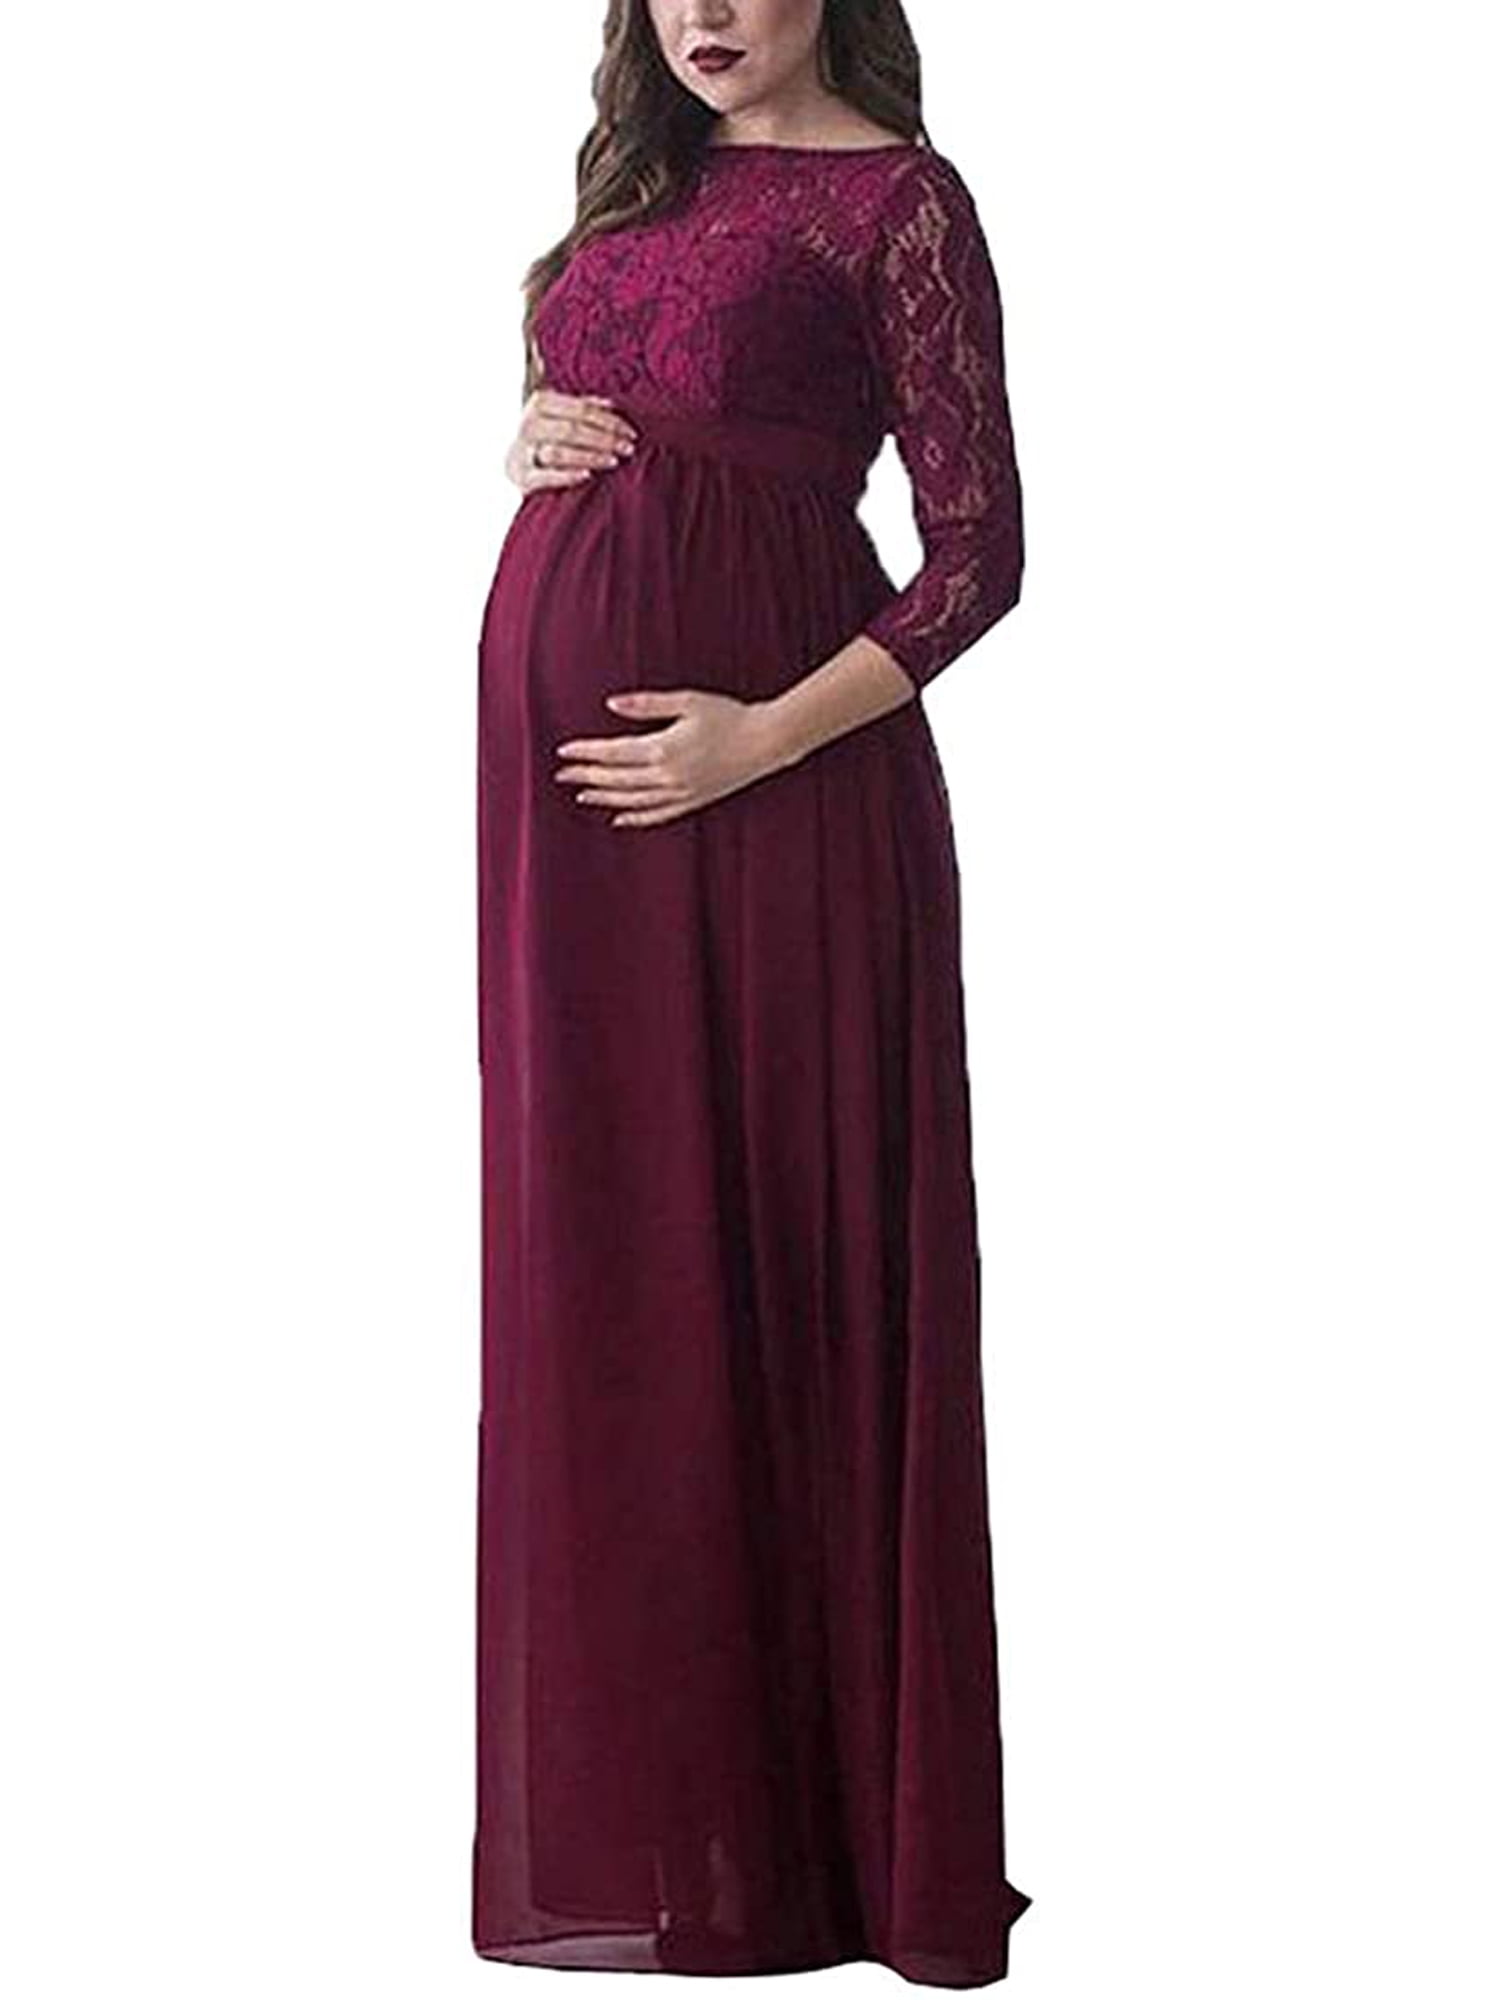 Women Vintage Lace Floral Maternity Dress Photography Baby Shower Party Long Maxi Gown Dresses 